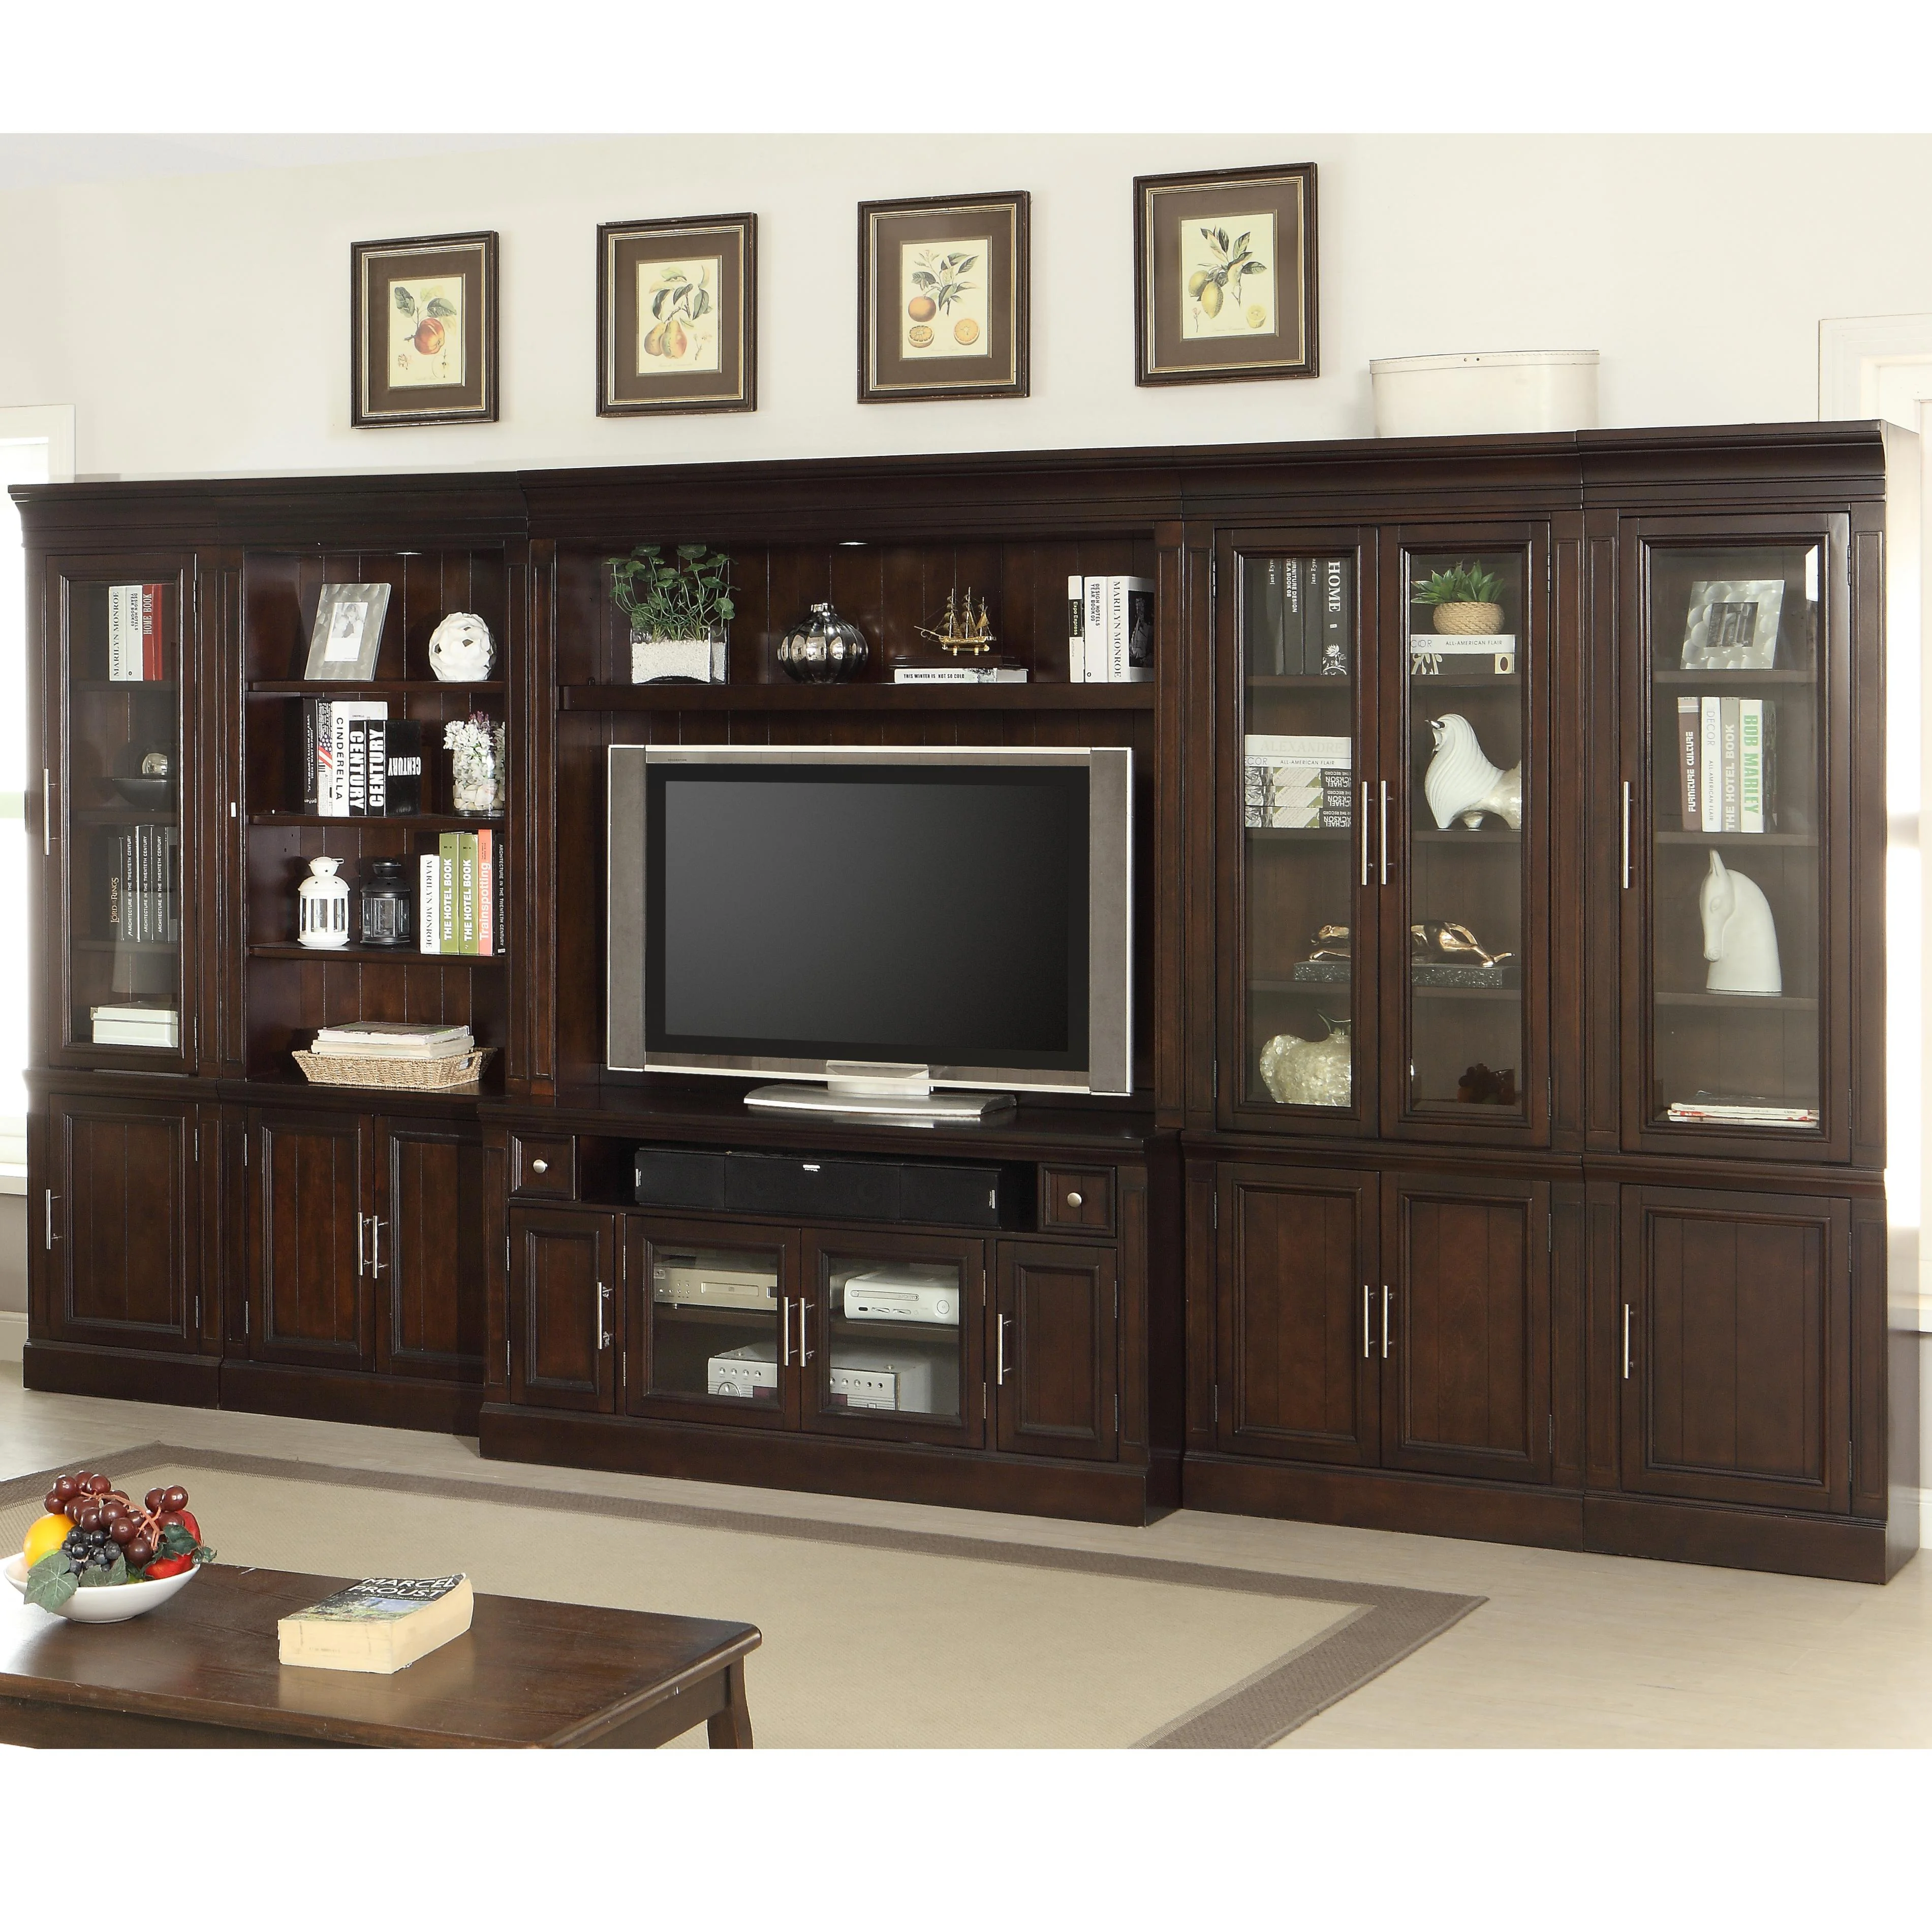 Parker House Stanford STA Wall Unit 7 Wall Unit with TV Console